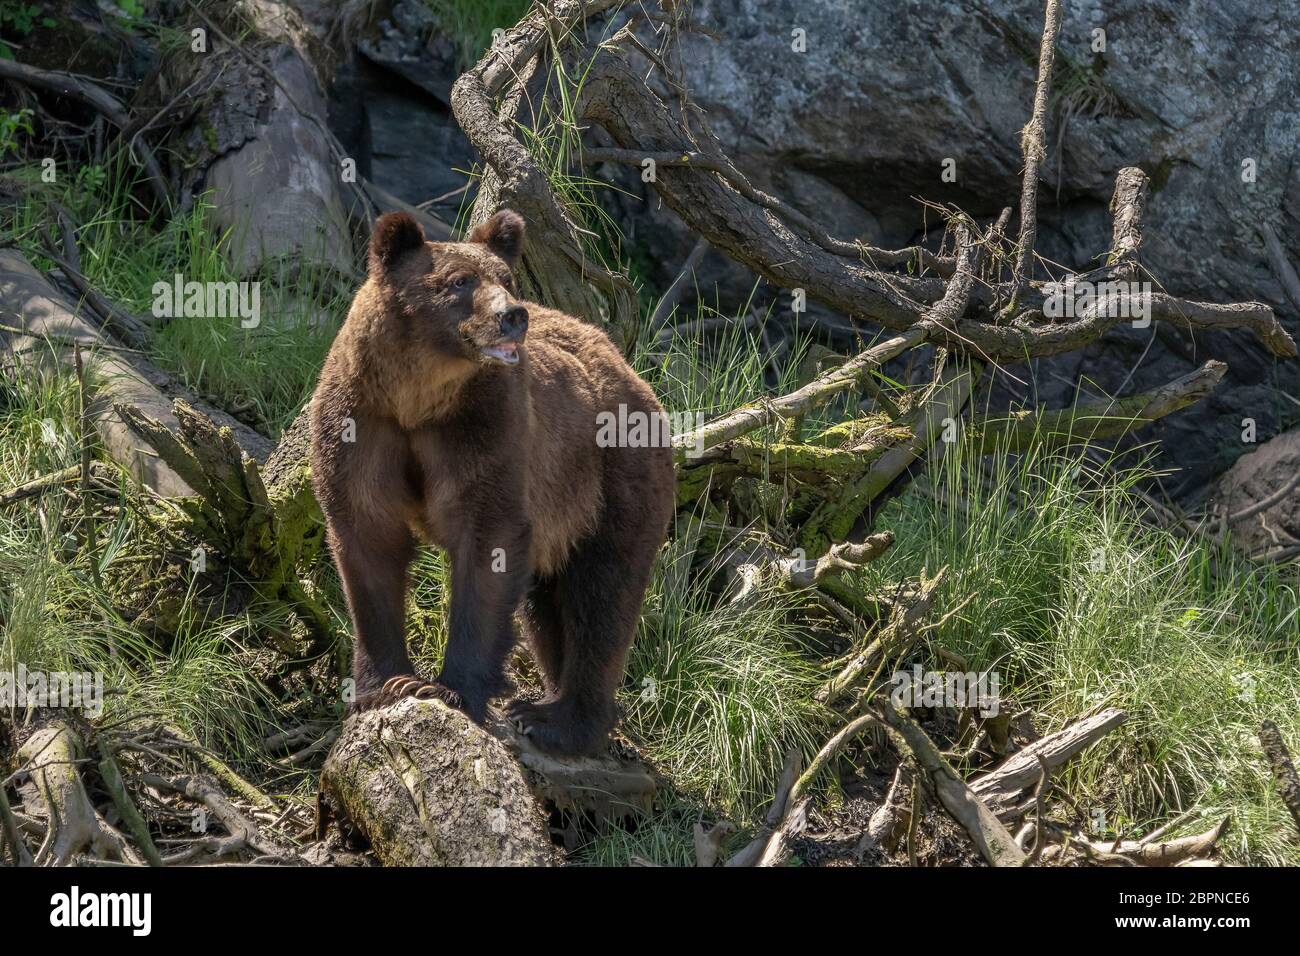 Mother grizzly with curled lip in stress display sensing a male in the area, Khutzeymateen inlet, BC Stock Photo